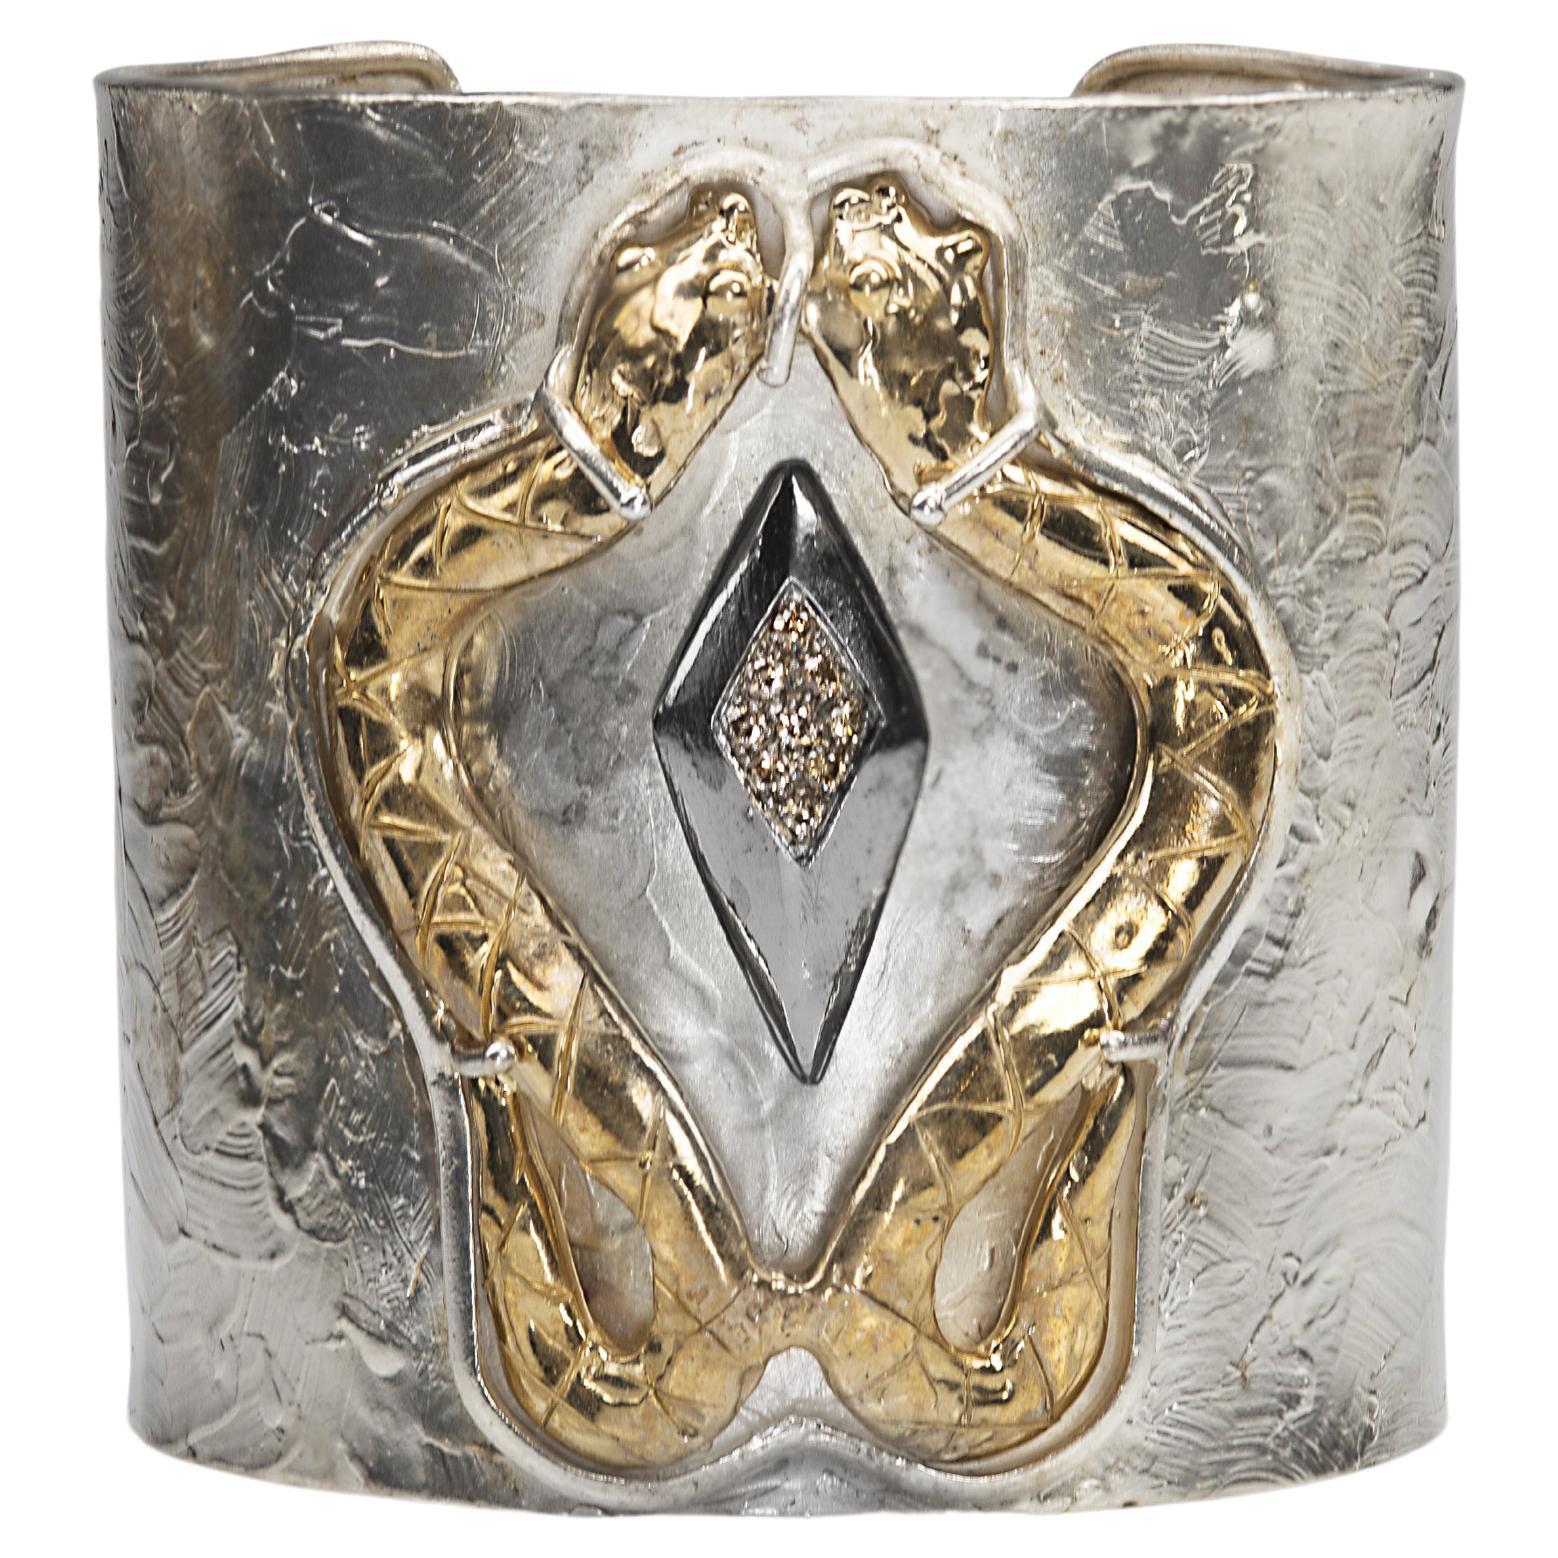 Featured on Rapaport 0.20 Karat Diamond Gold-Plated Silver Cuff Bracelet  For Sale